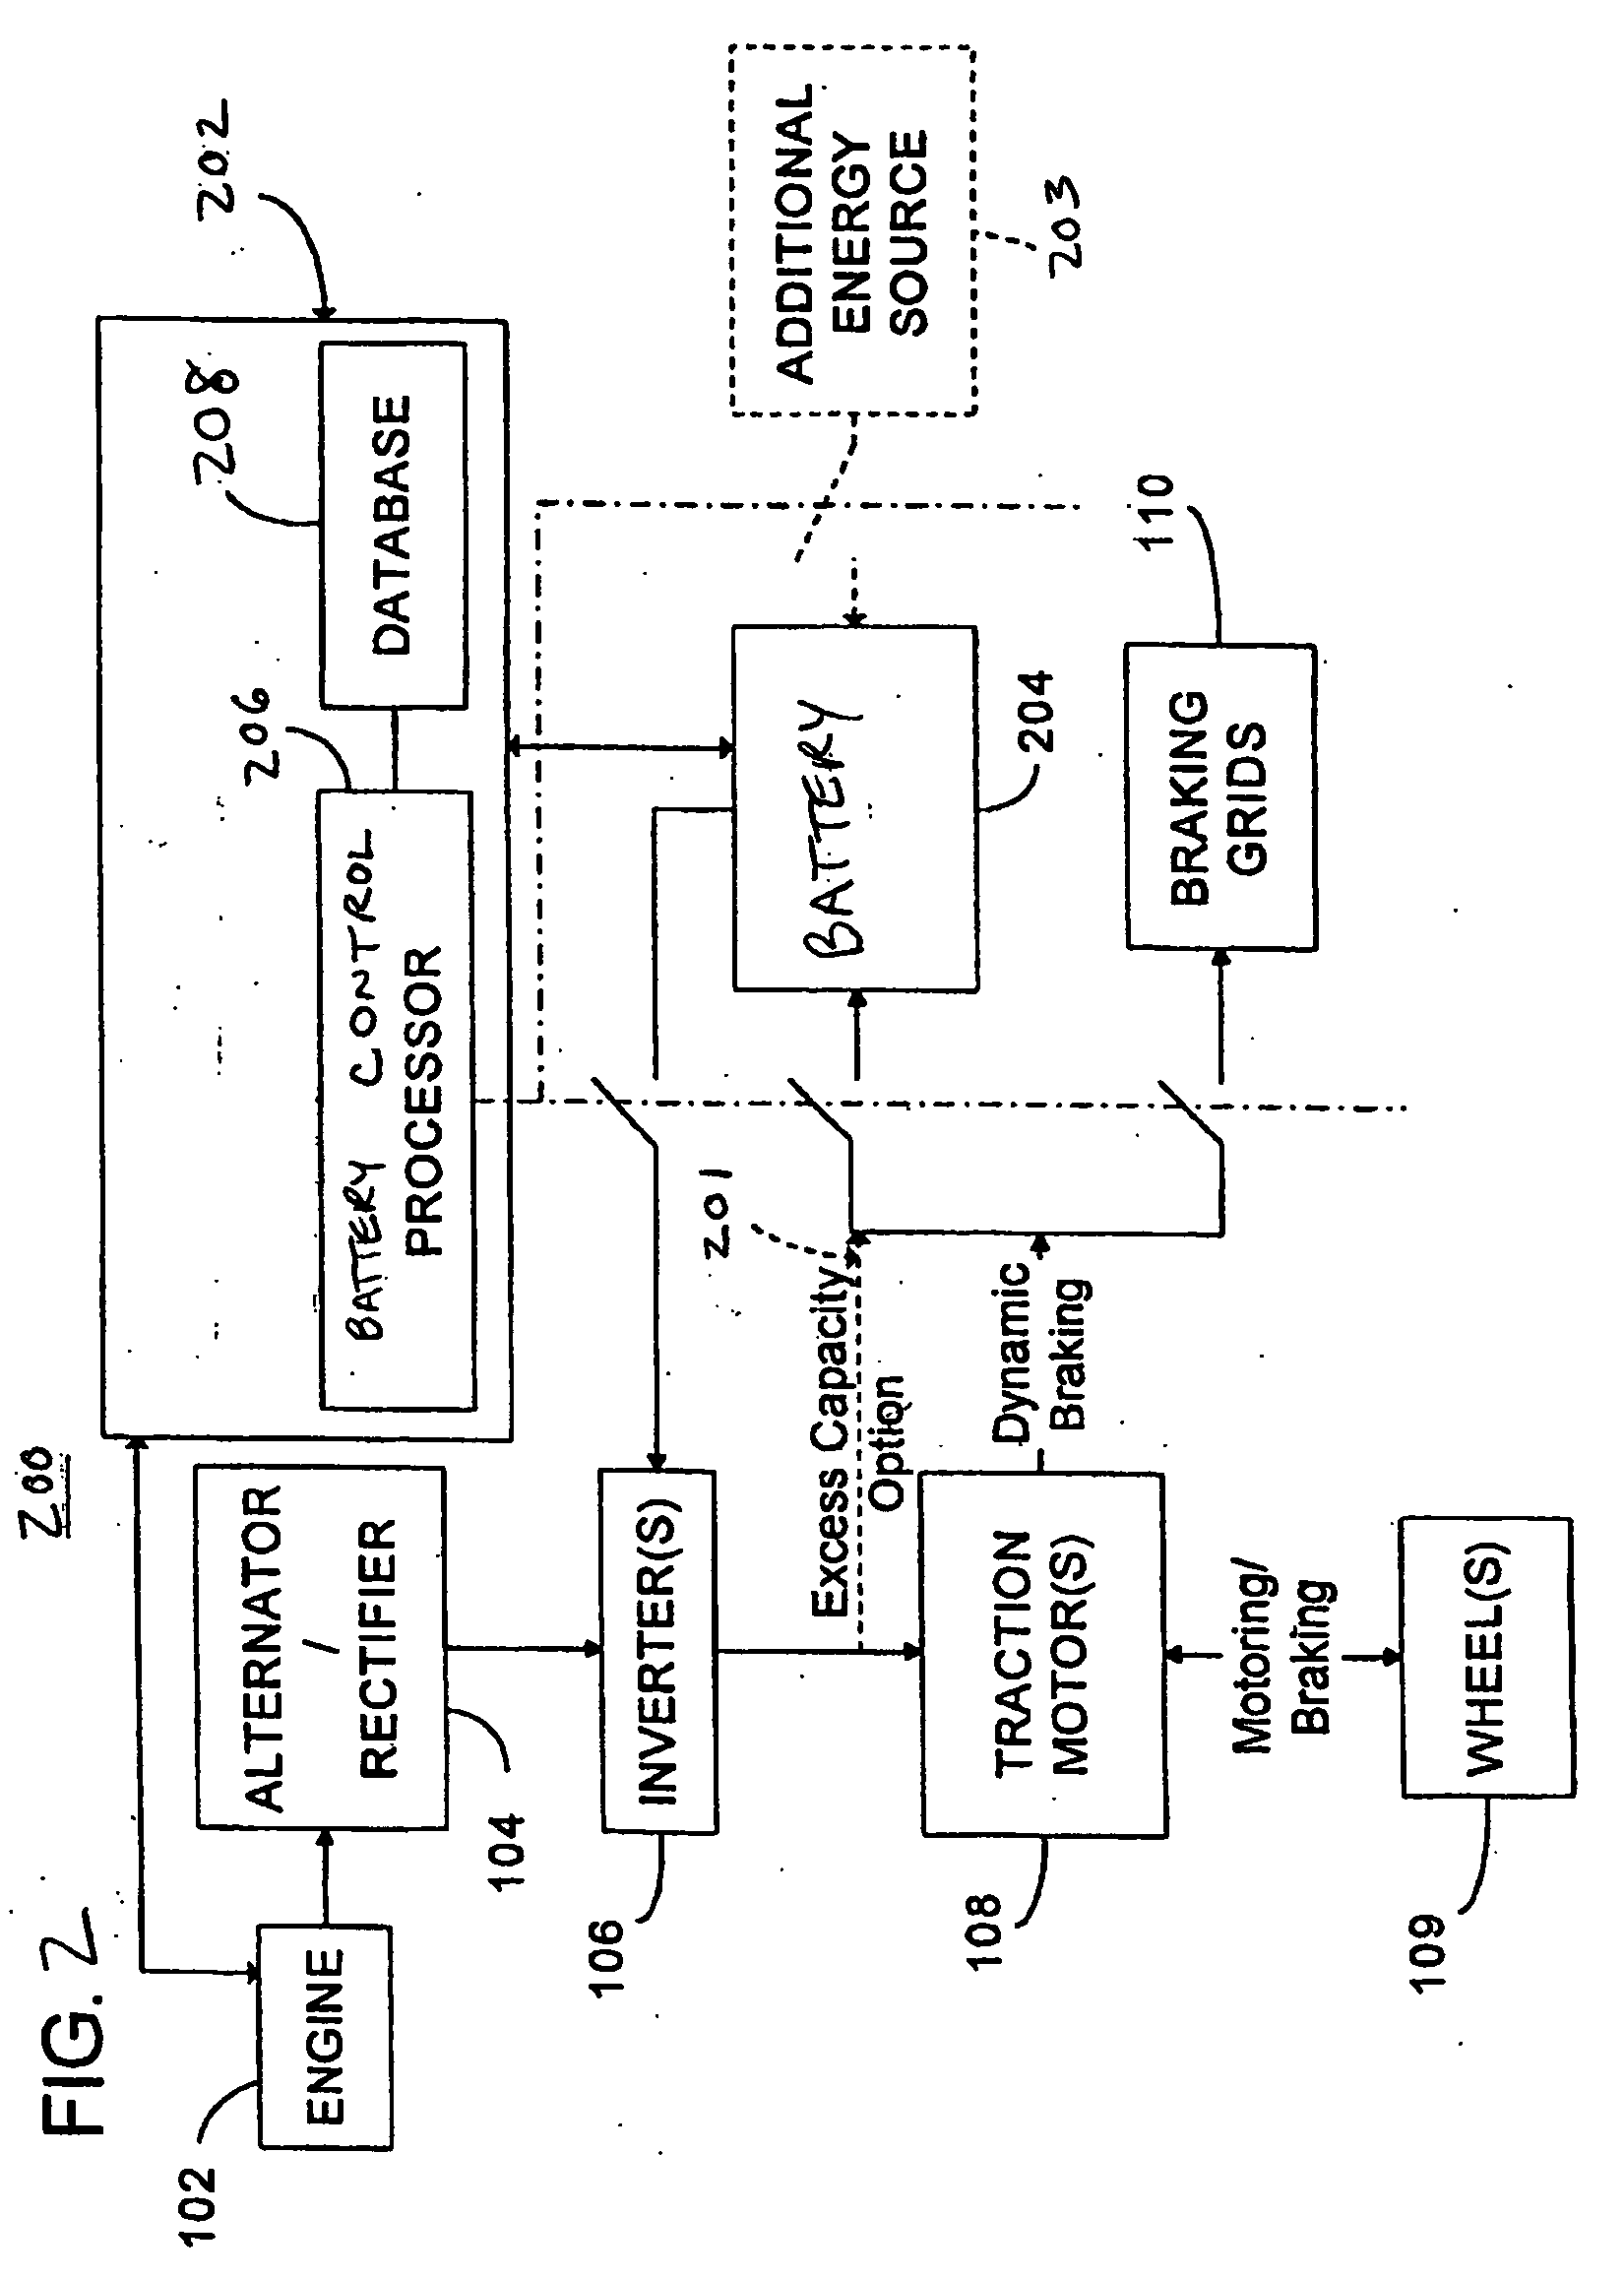 High temperature battery system for hybrid locomotive and offhighway vehicles